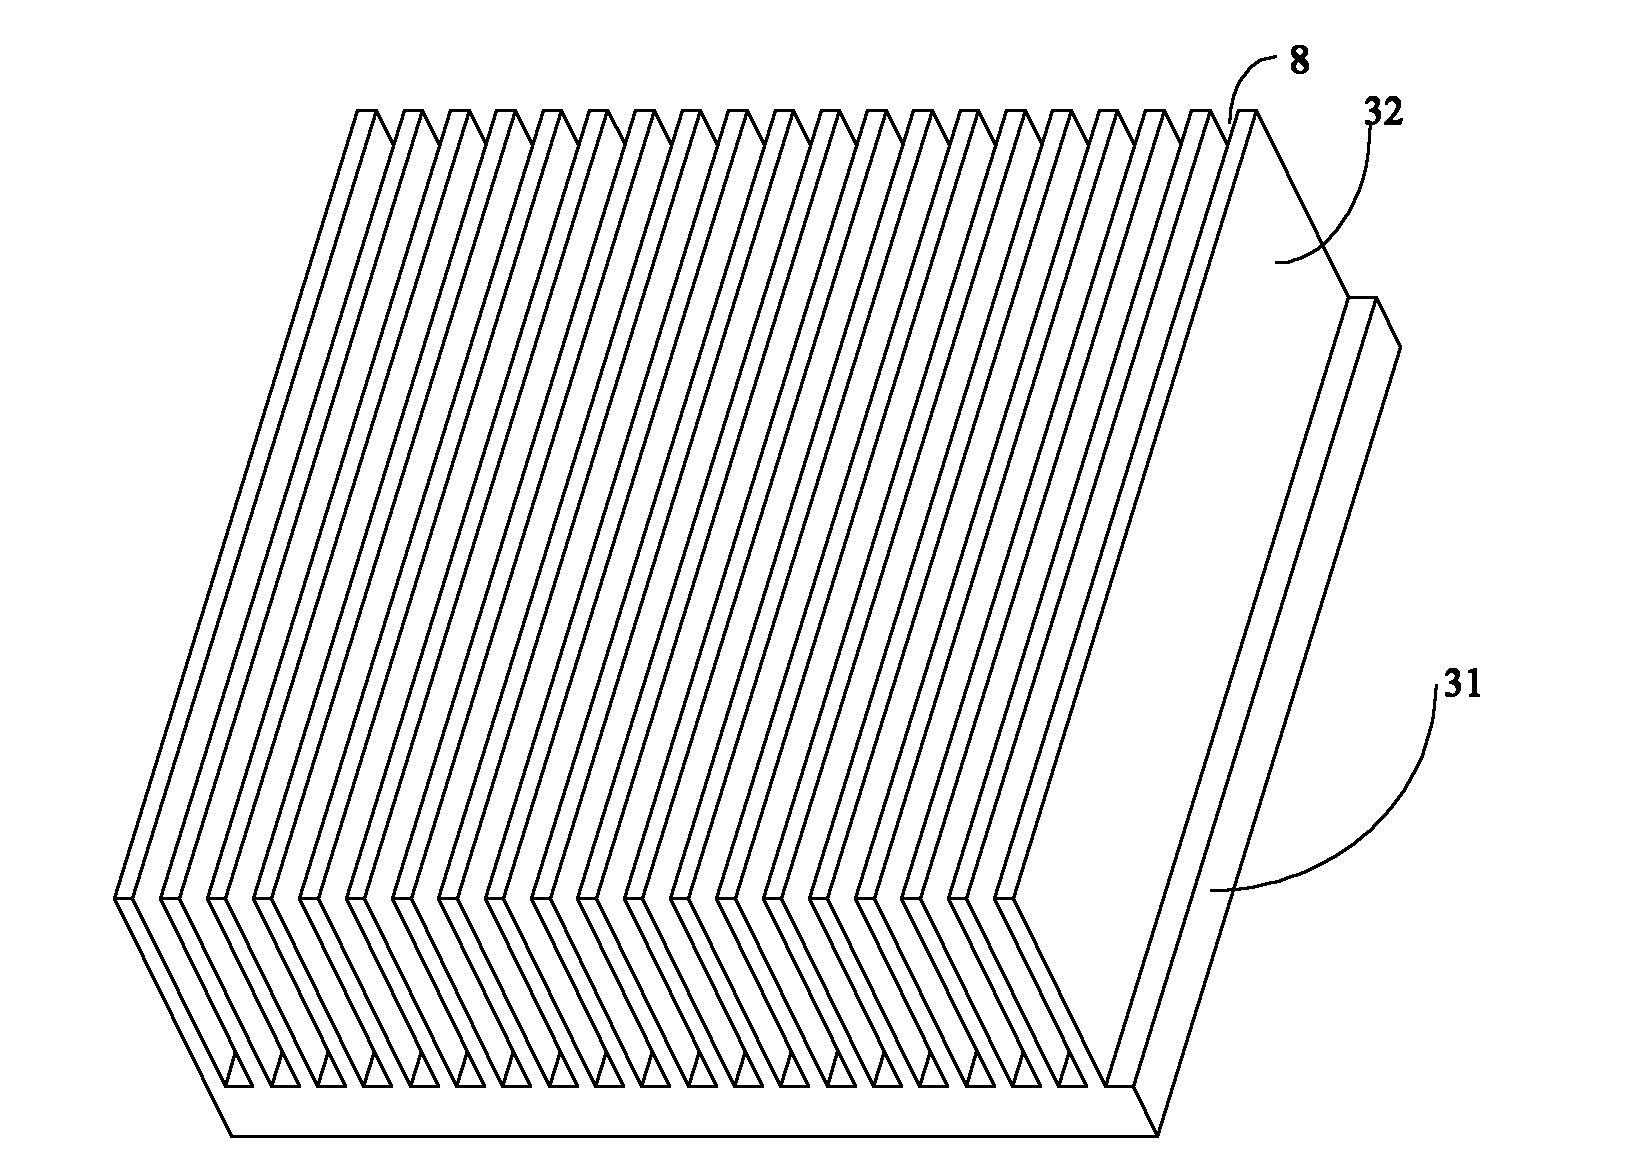 Heat-dissipation structure for LED (Light Emitting Diode) light